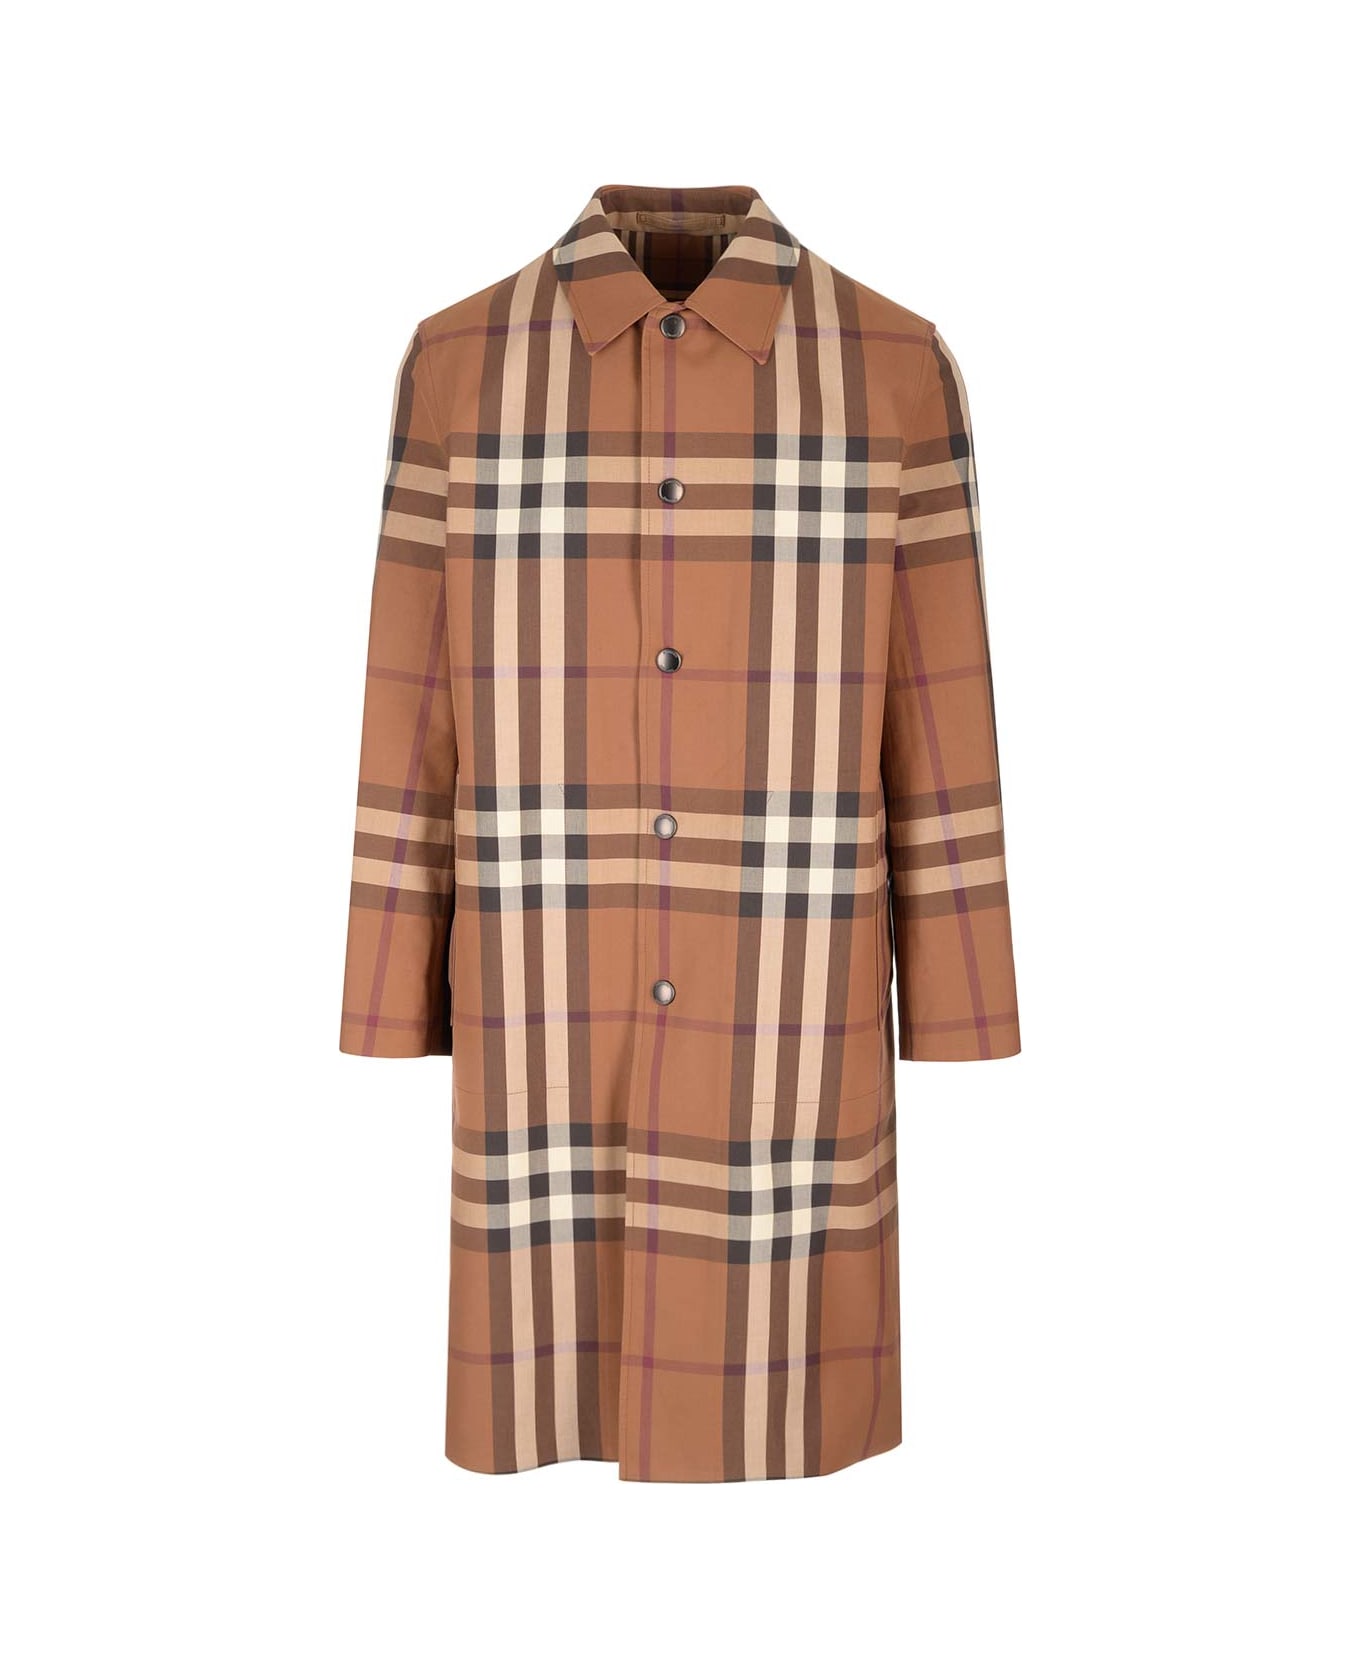 Burberry Reversible Trench Coat With Check Motif - Brown コート